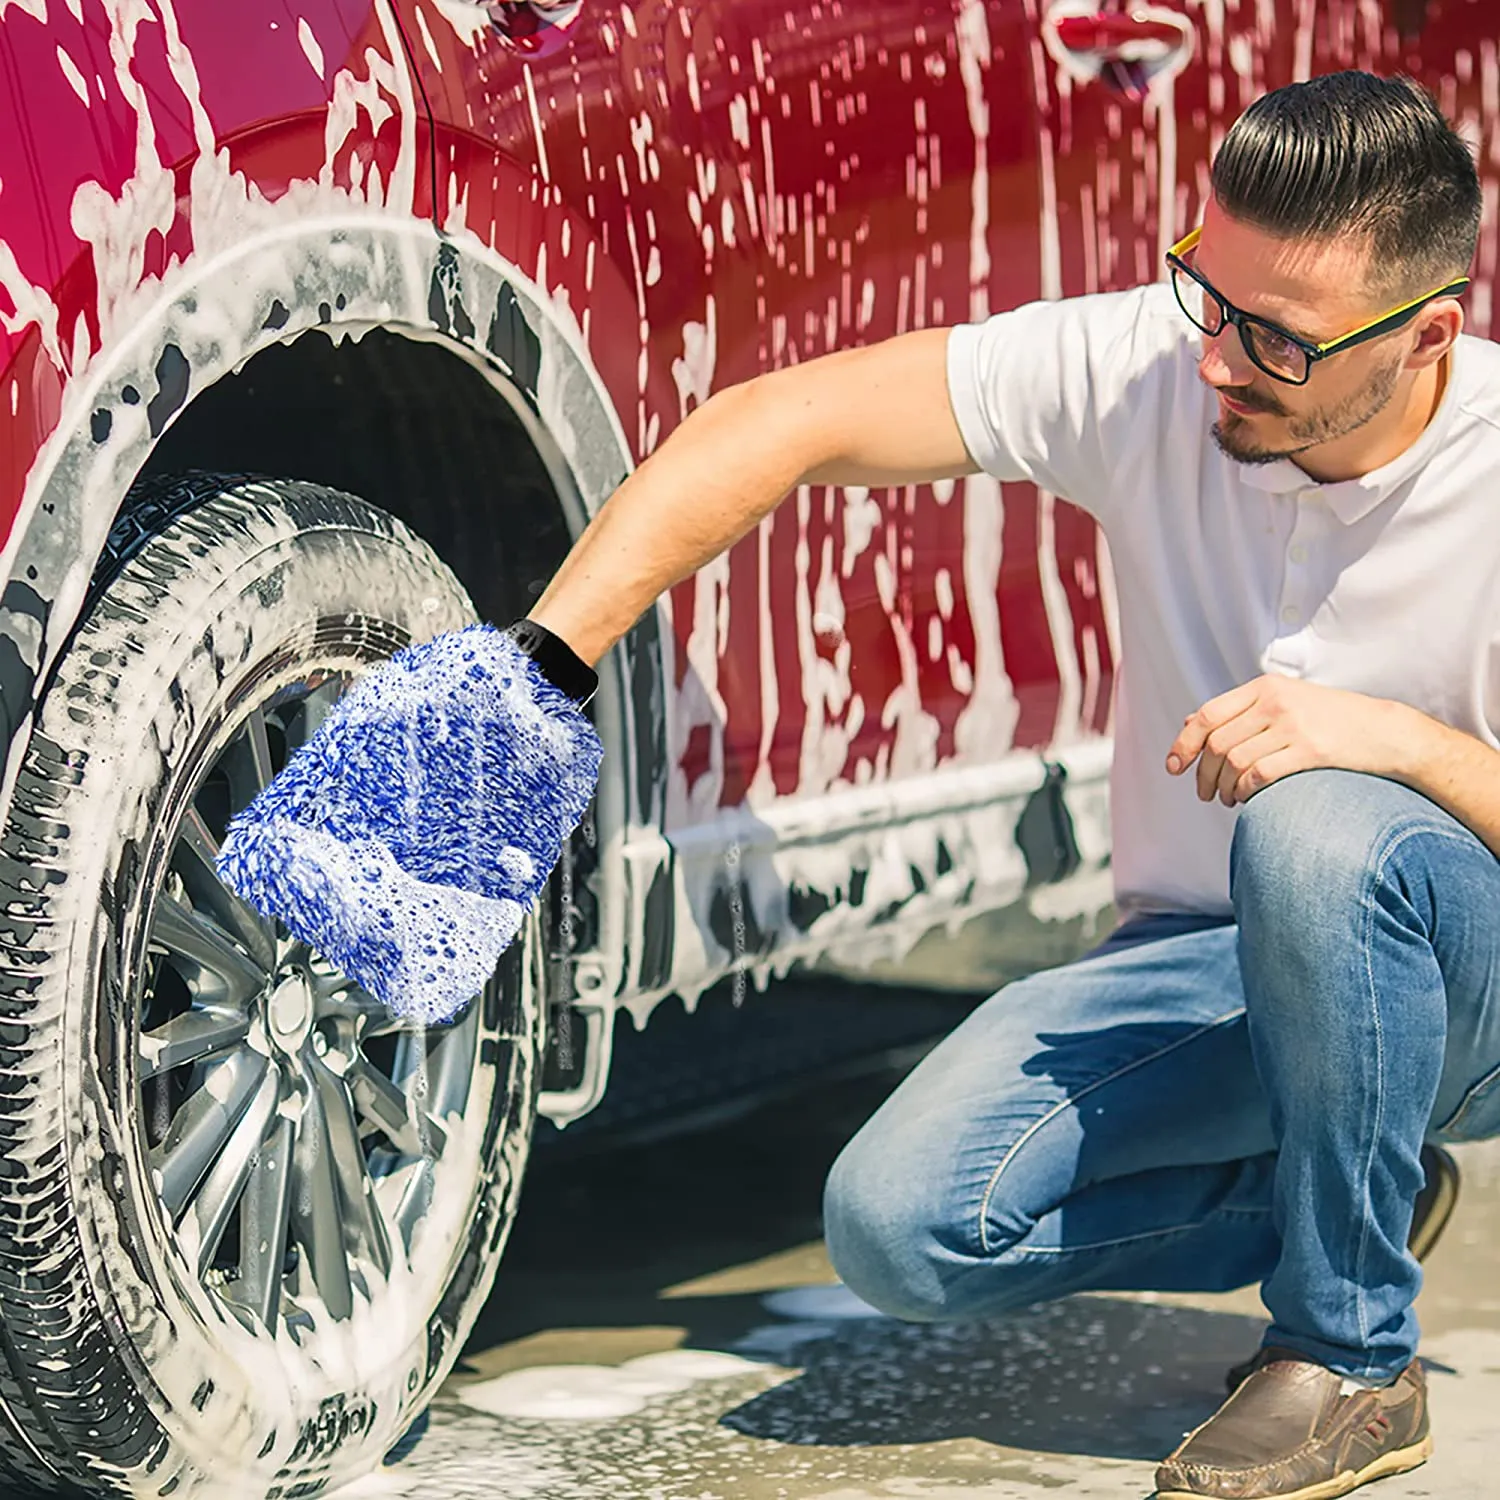 How often is it necessary to wash the car?